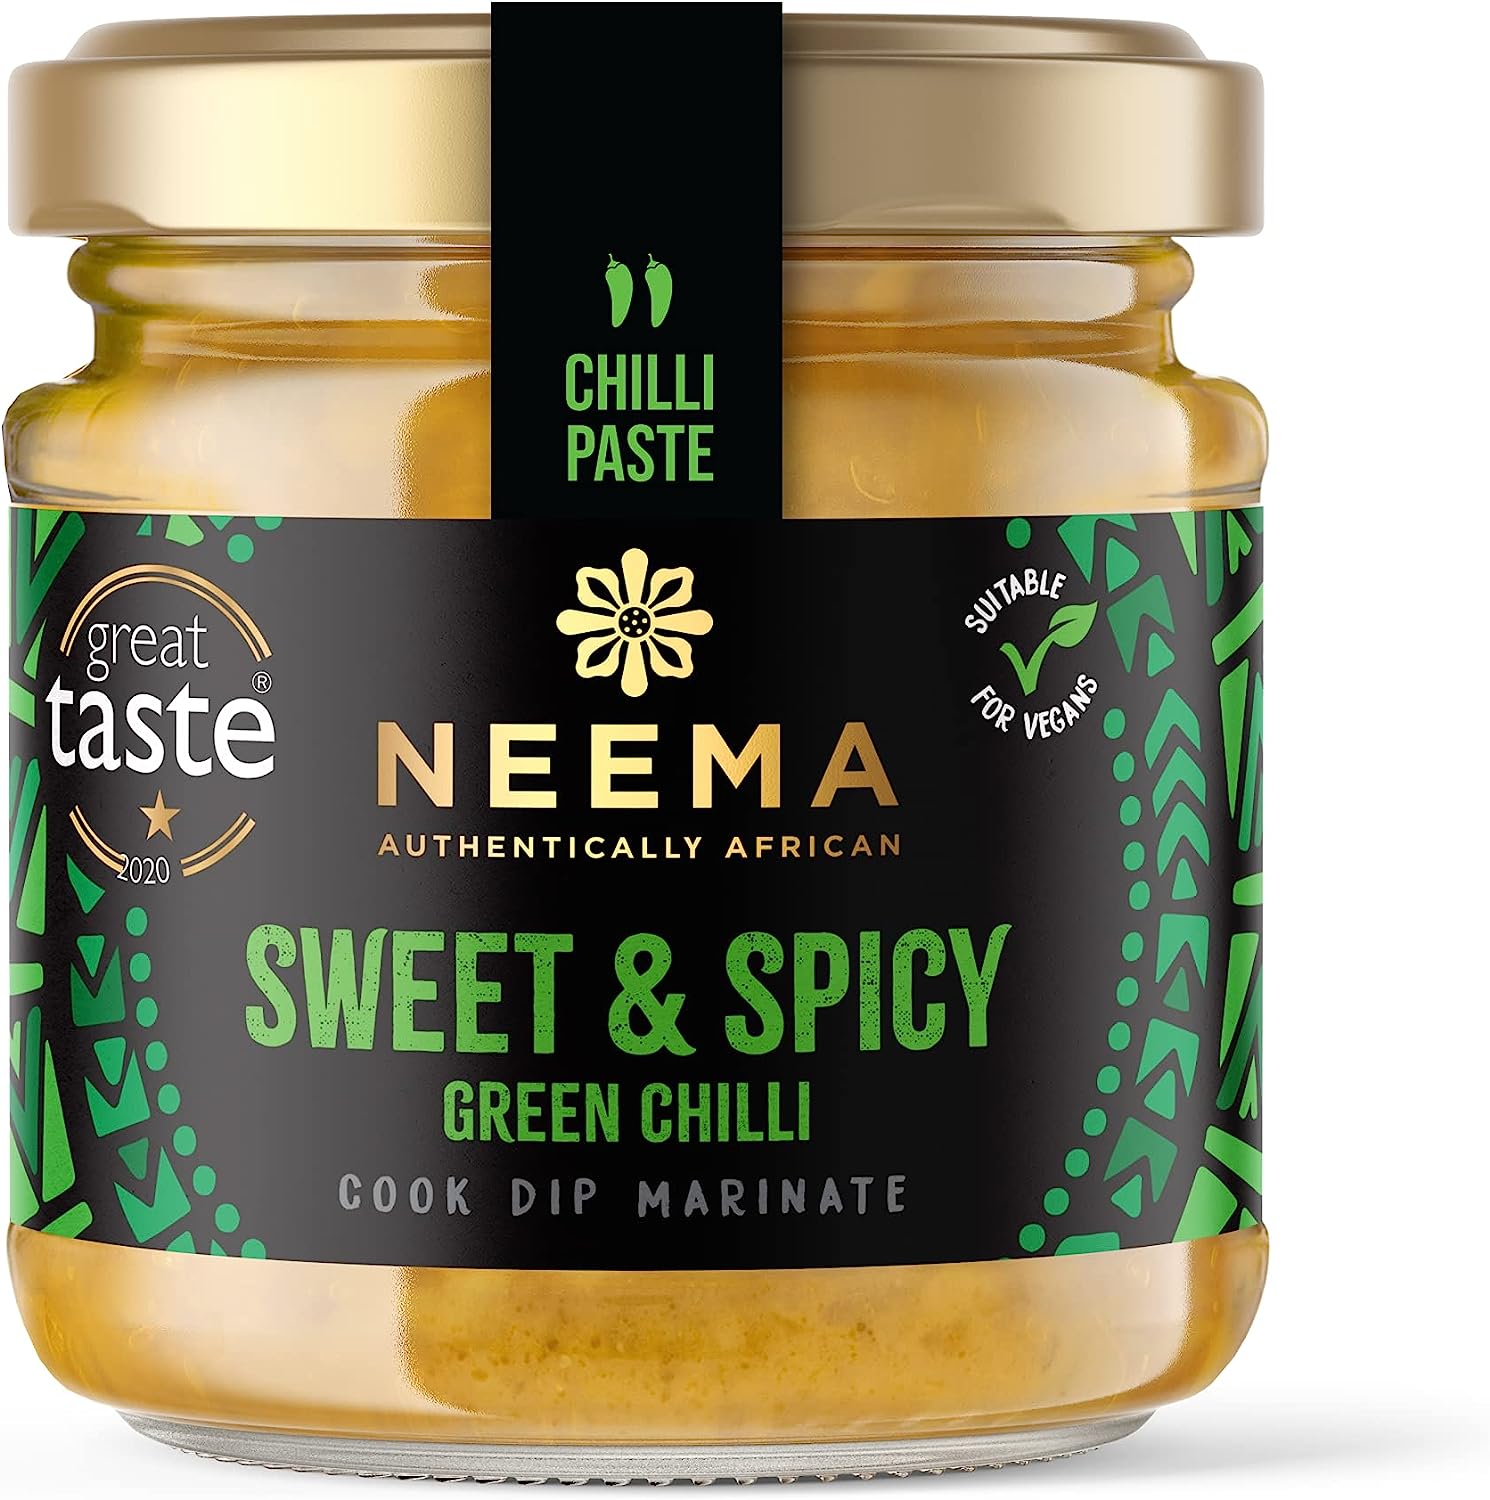 https://store.approvedfood.co.uk/assets/fbimg/src_images/neema_sweet_and_spicy_green_chilli_106g.jpg